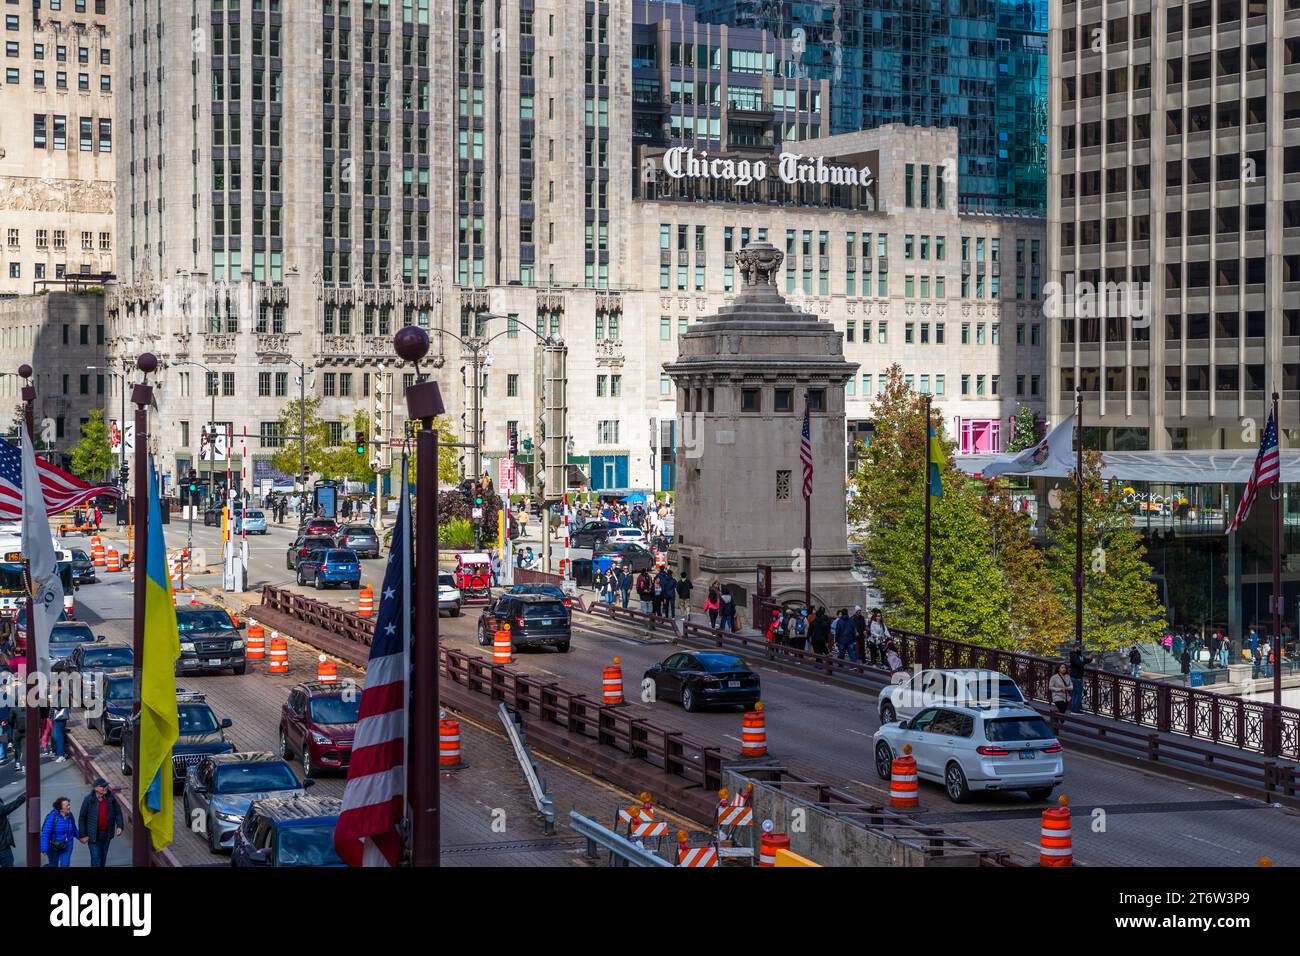 View over the DuSable Bridge to the Chicago Tribune on Michigan Avenue in Chicago, Illinois, United States Stock Photo